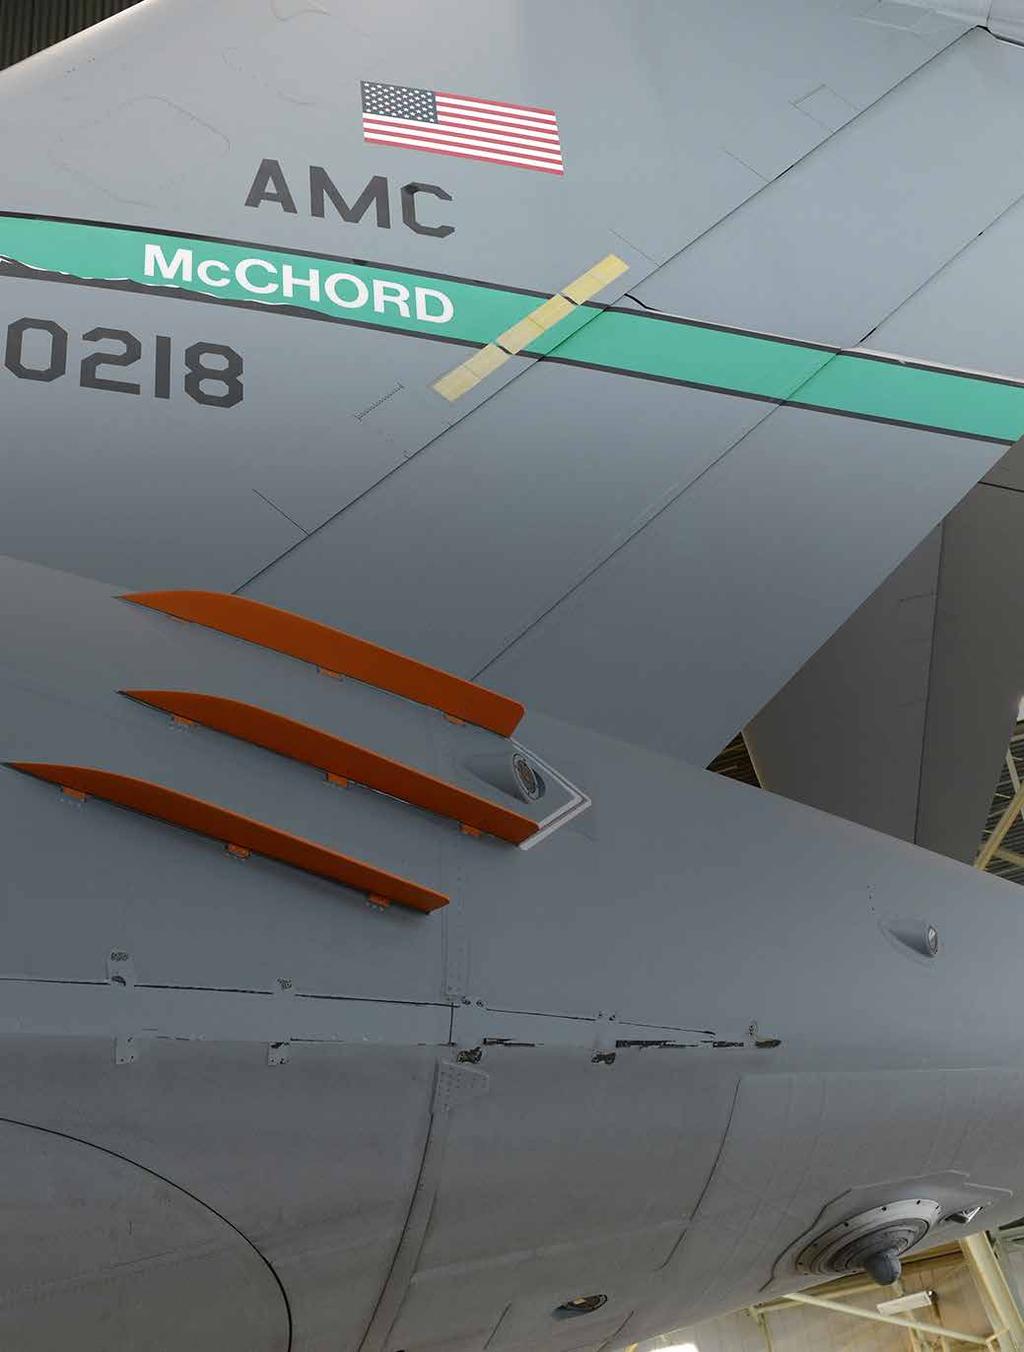 AT THE FOREFRONT Citizen Airmen lead efforts to save fuel and money // By Tyler Grimes The first phase of C-17 Drag Reduction was completed in March.